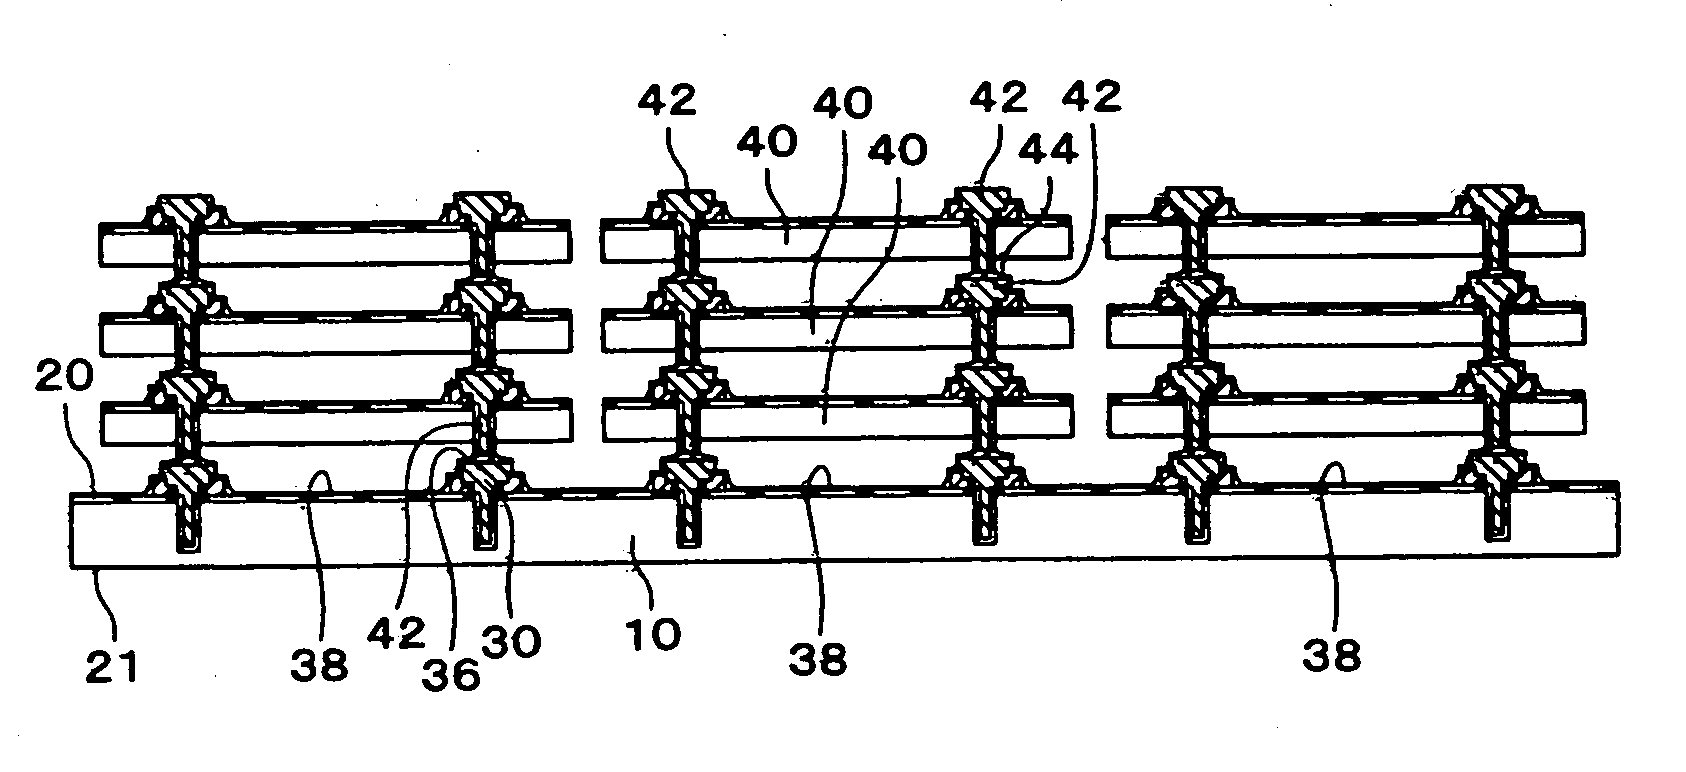 Semiconductor device, method for manufacturing the same, circuit board, and electronic apparatus